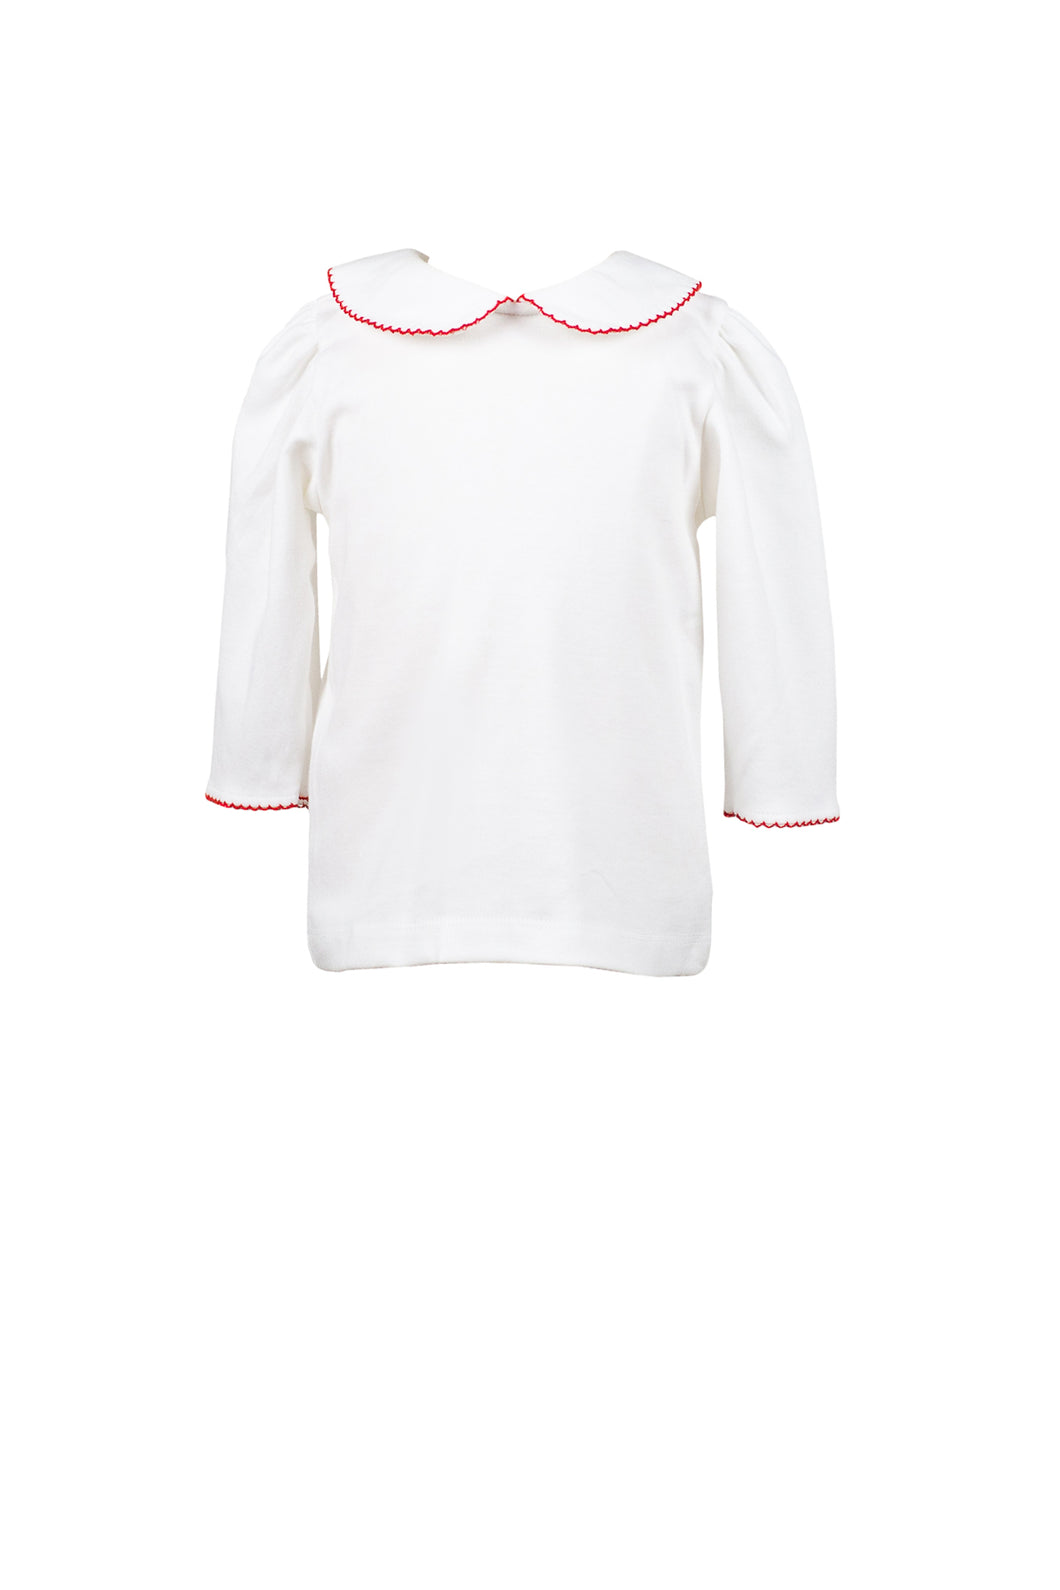 White Knit 3/4 Shirt - Red